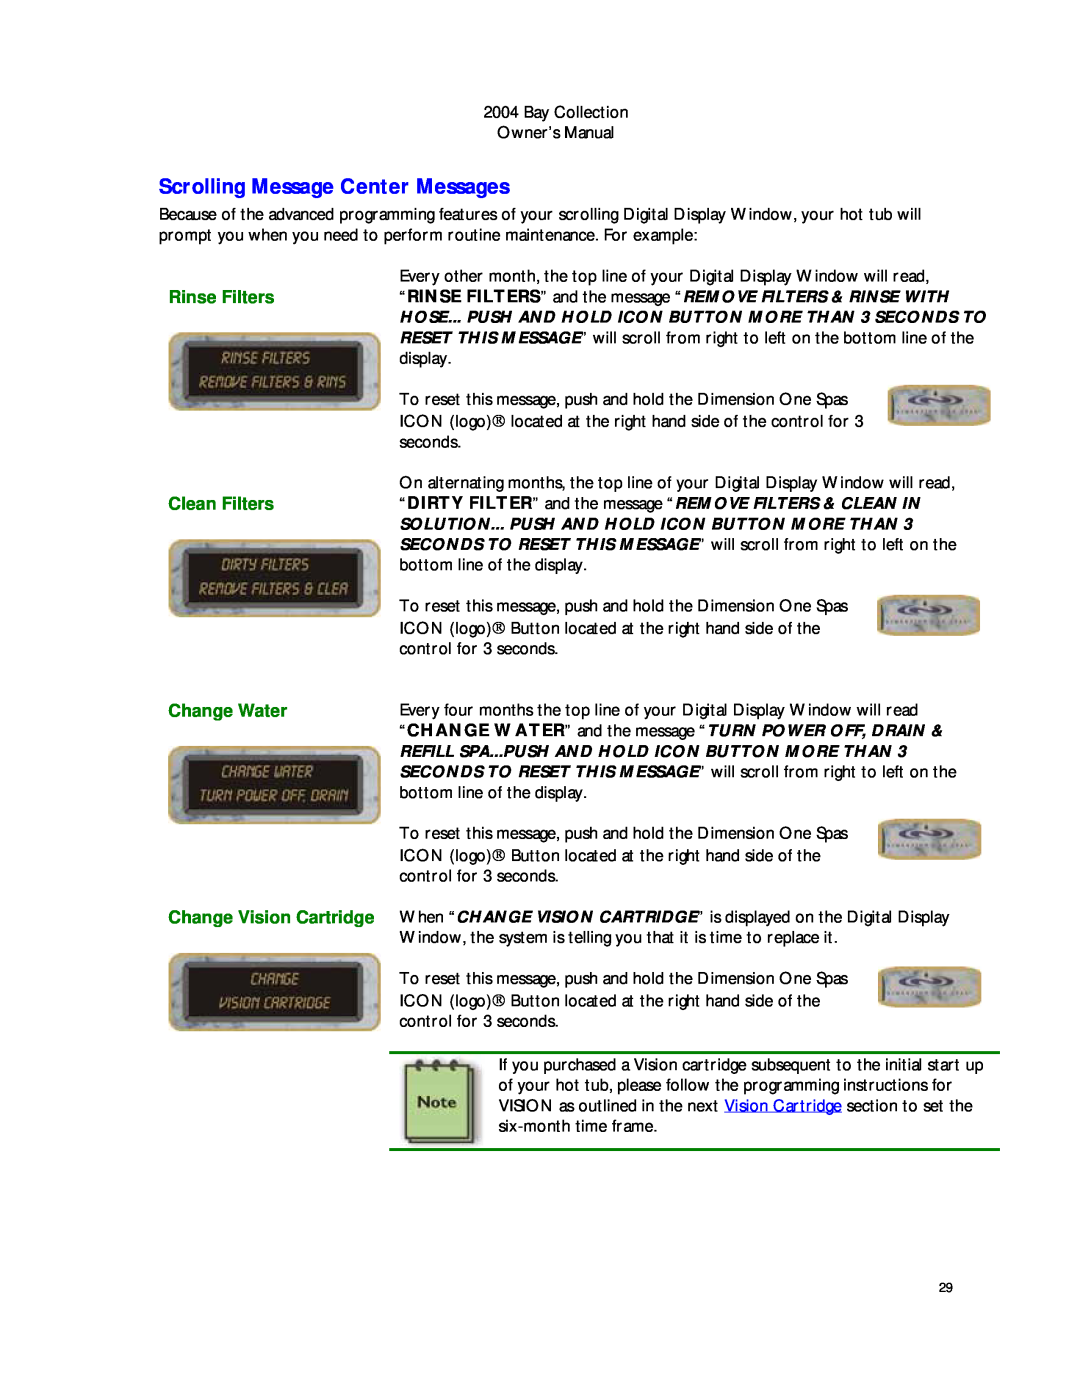 Dimension One Spas Bay Collection manual Scrolling Message Center Messages 